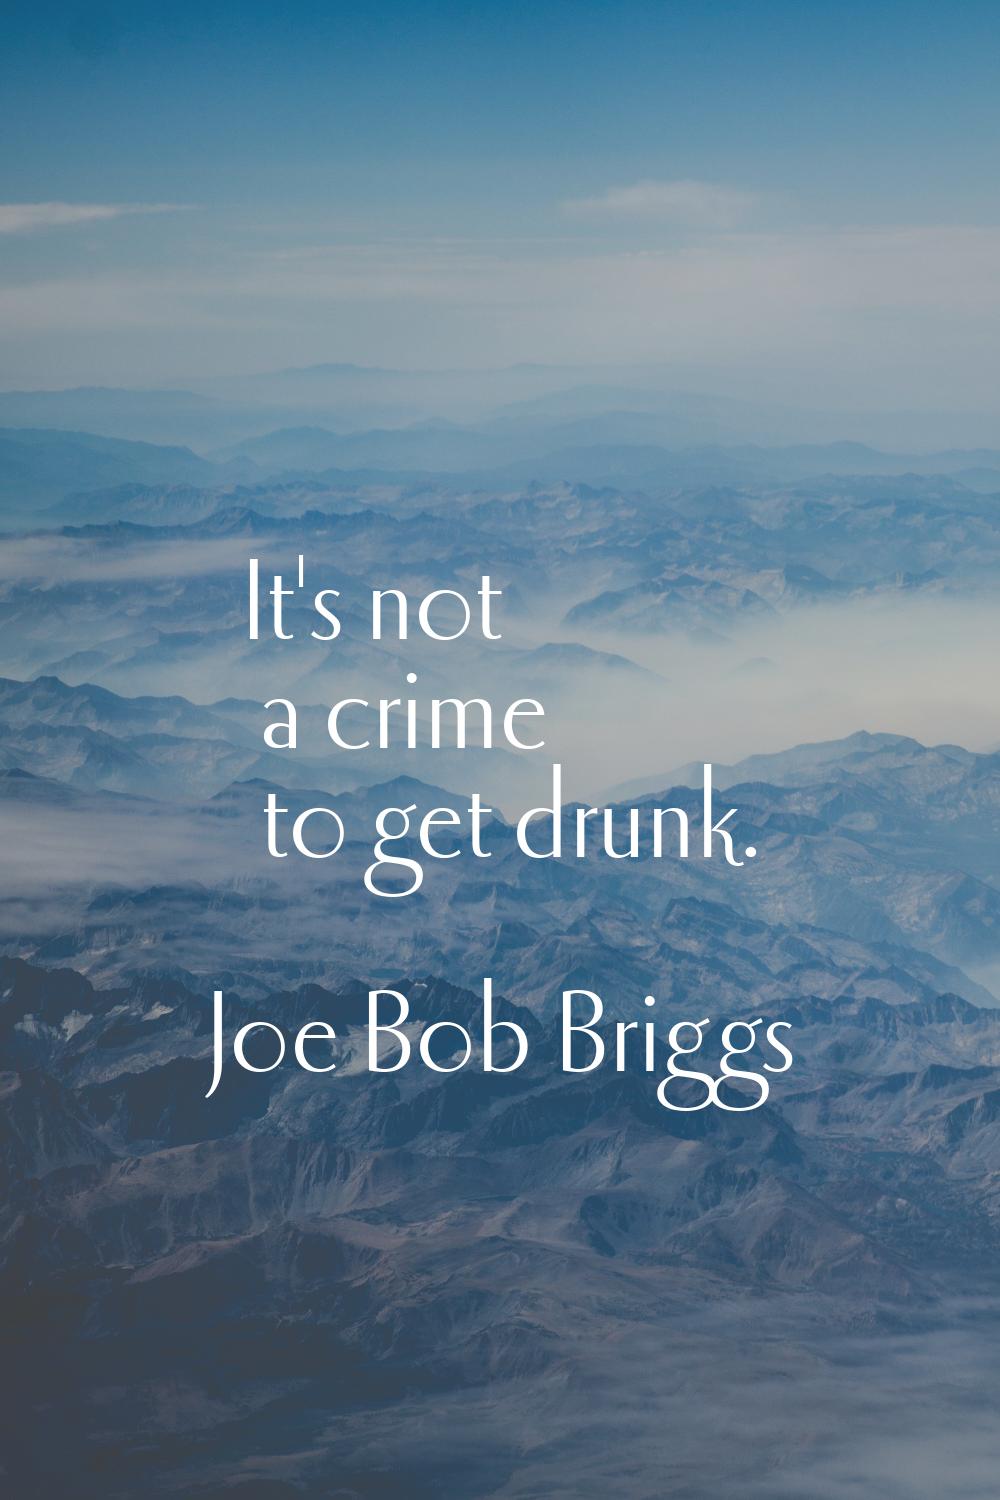 It's not a crime to get drunk.